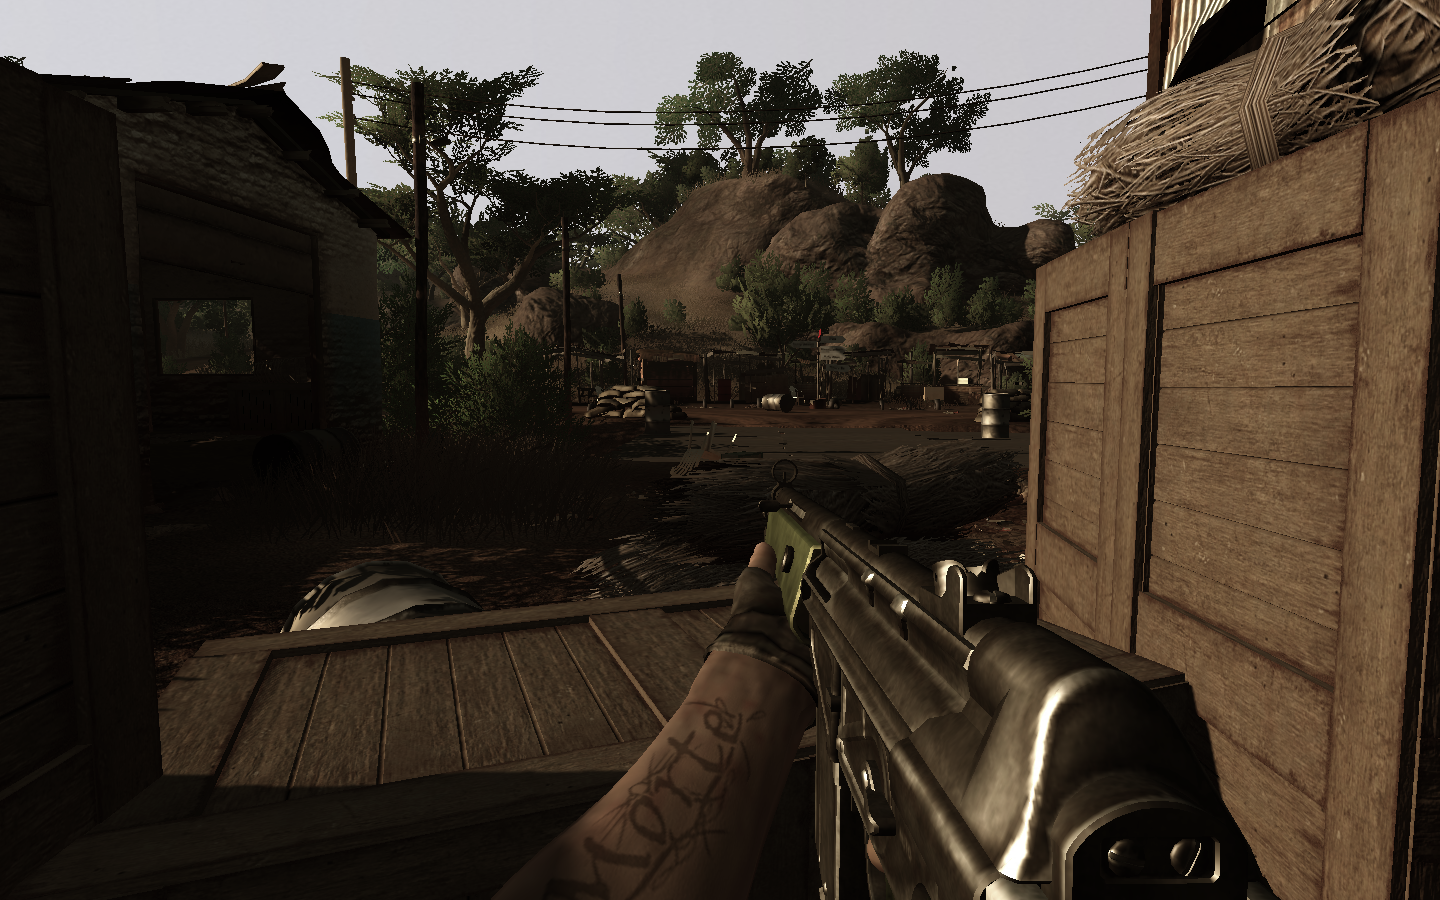 Far Cry 2 PC 1080p Gameplay at Max Settings 